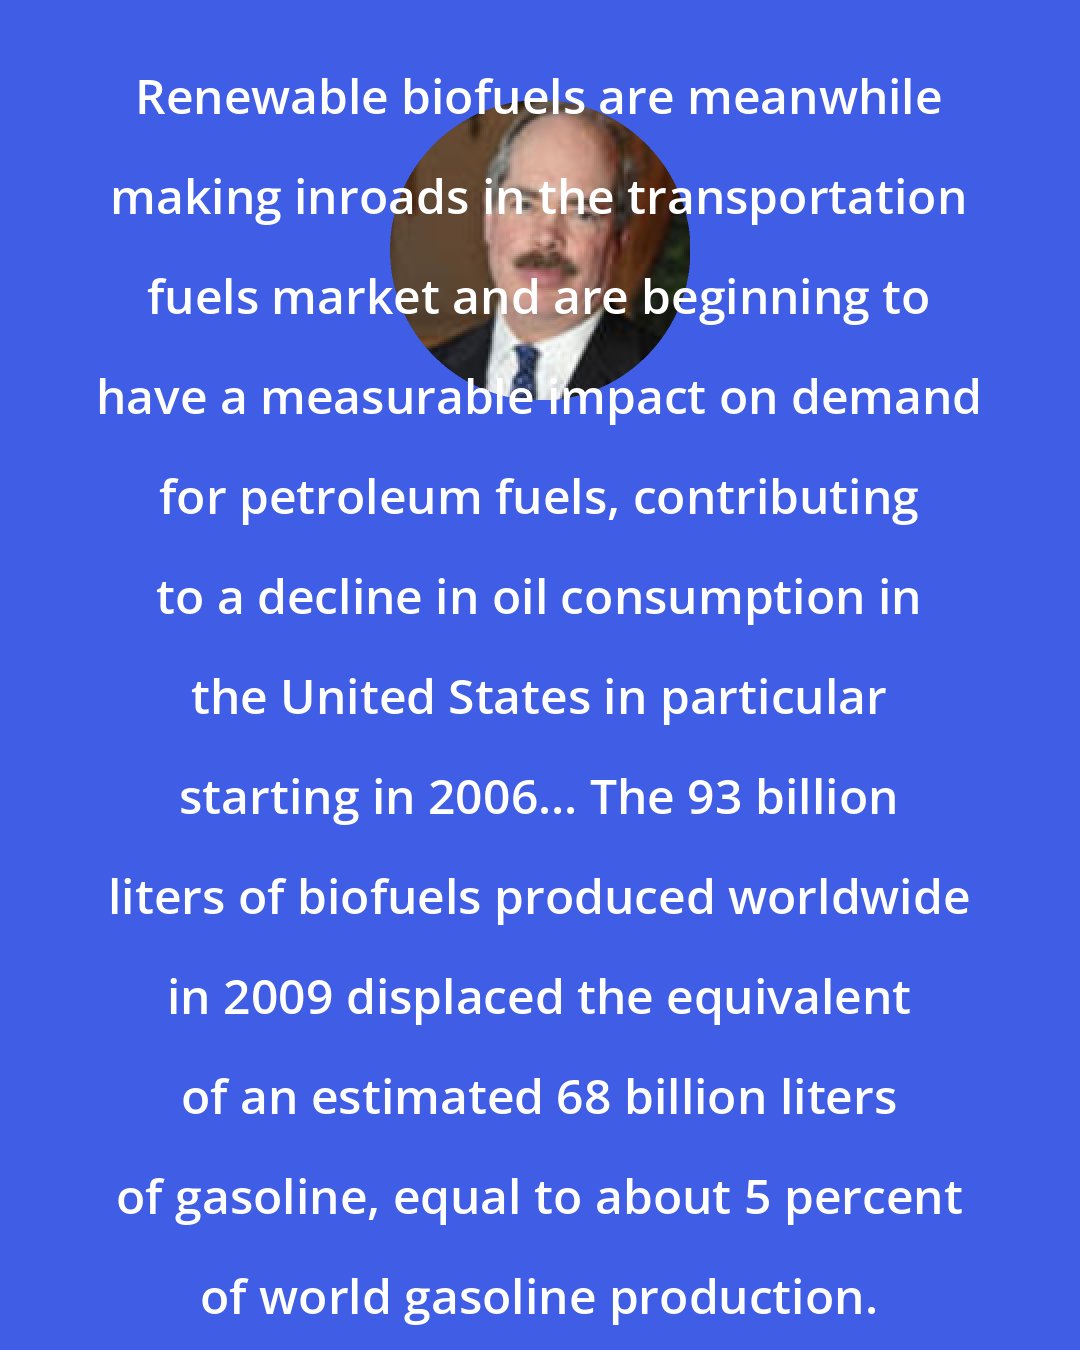 Christopher Flavin: Renewable biofuels are meanwhile making inroads in the transportation fuels market and are beginning to have a measurable impact on demand for petroleum fuels, contributing to a decline in oil consumption in the United States in particular starting in 2006... The 93 billion liters of biofuels produced worldwide in 2009 displaced the equivalent of an estimated 68 billion liters of gasoline, equal to about 5 percent of world gasoline production.